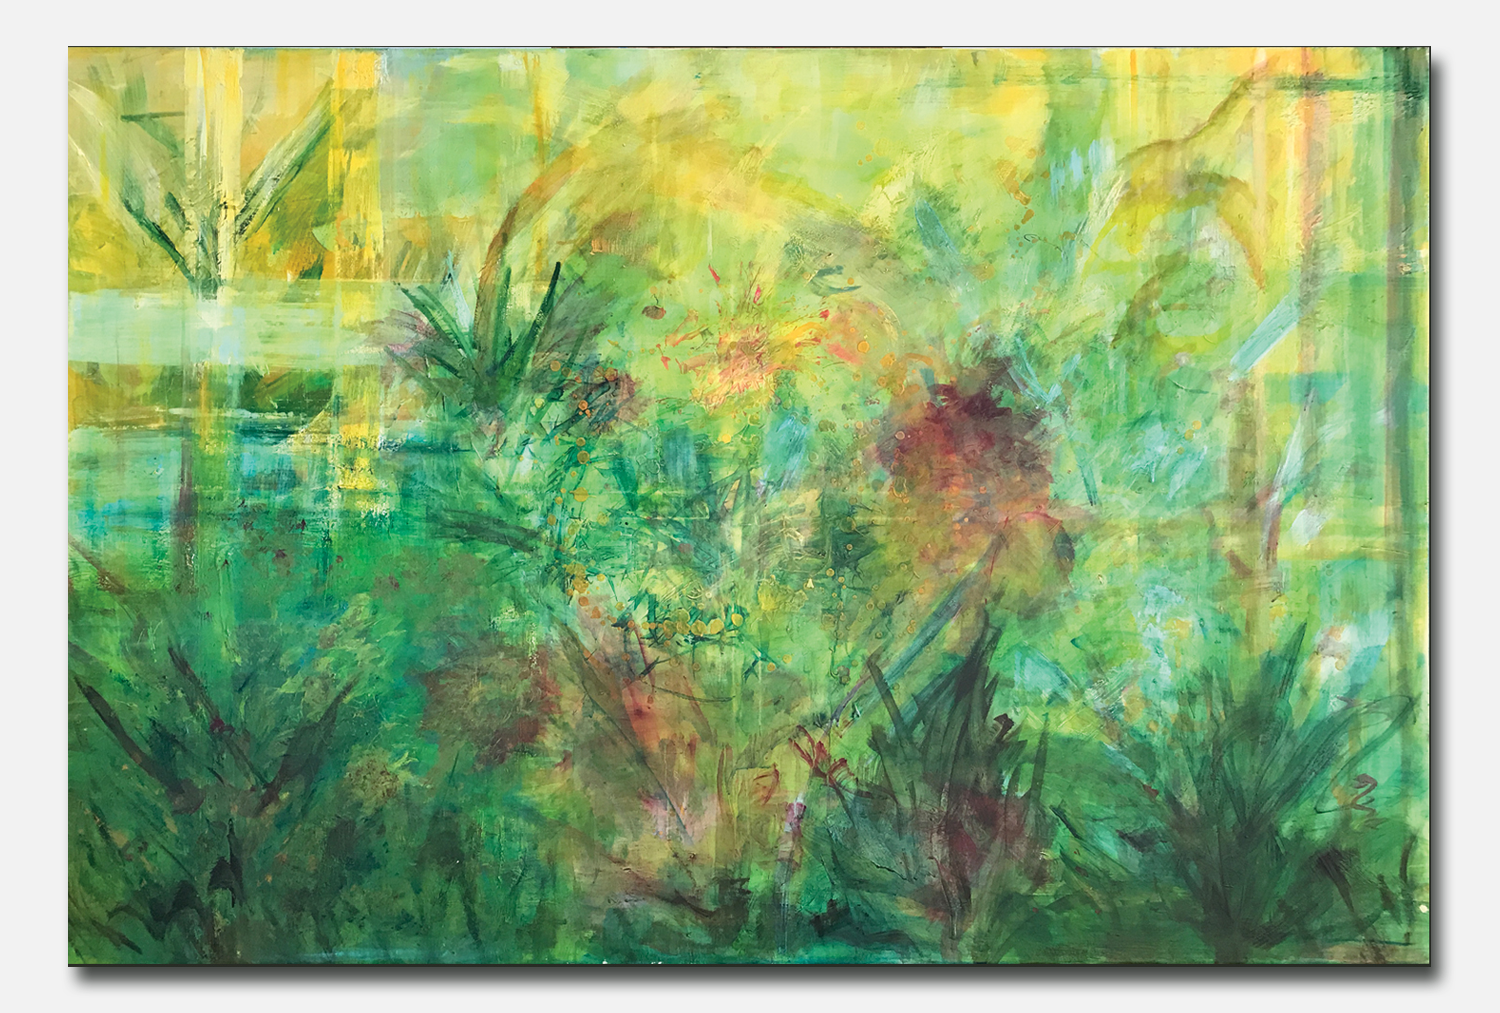 Shobhana Tyroller "Exuberance of nature (One)" 2019. Acrylic on Cotton Canvas, 51 1/5 × 76 4/5 × 1 in | 130 × 195 × 2.5 cm